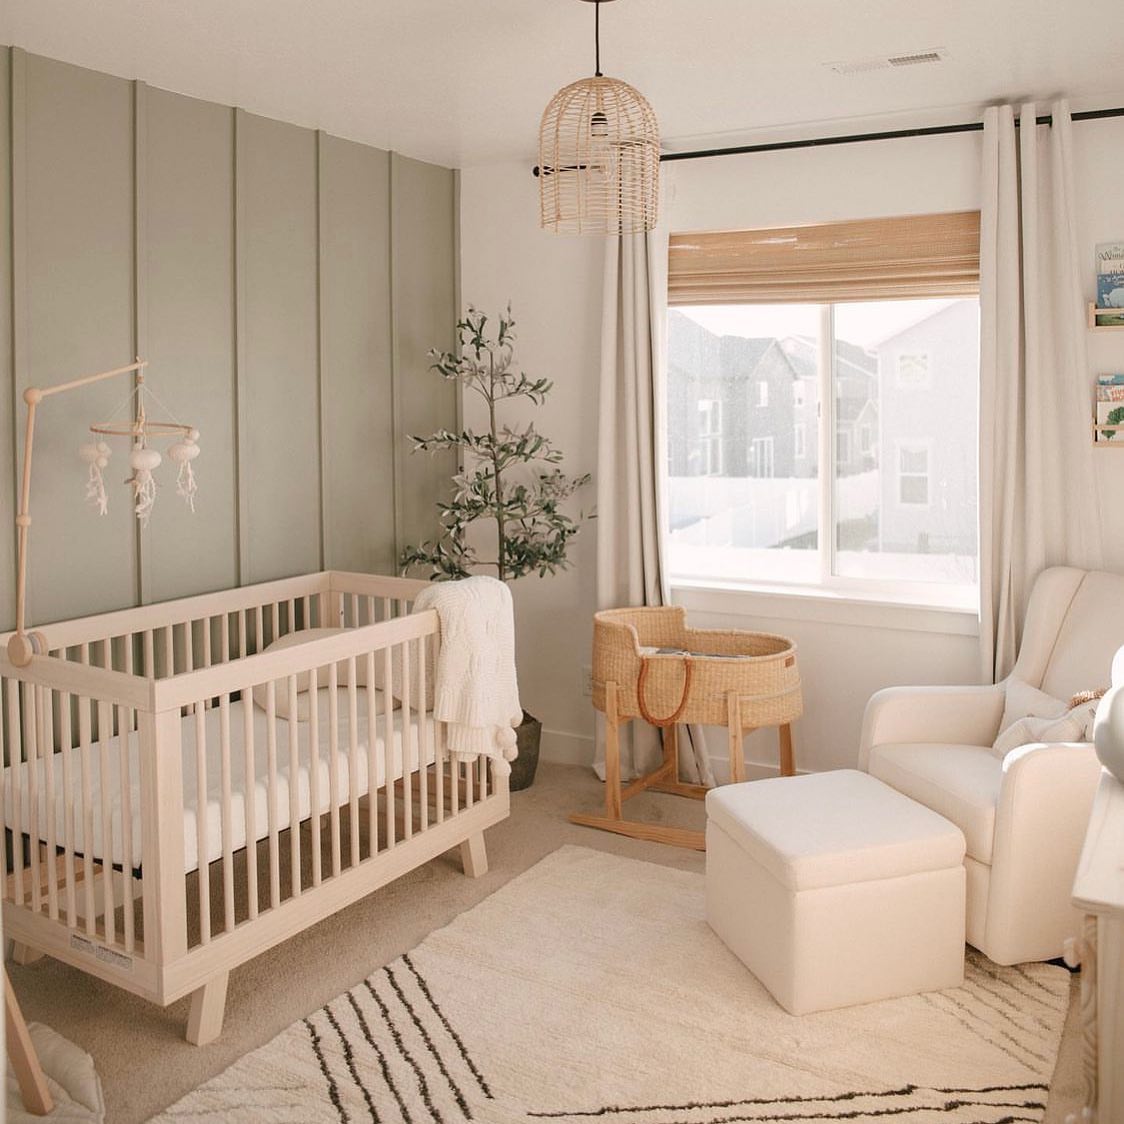 A sage green nursery with a crib, dresser, and chair.